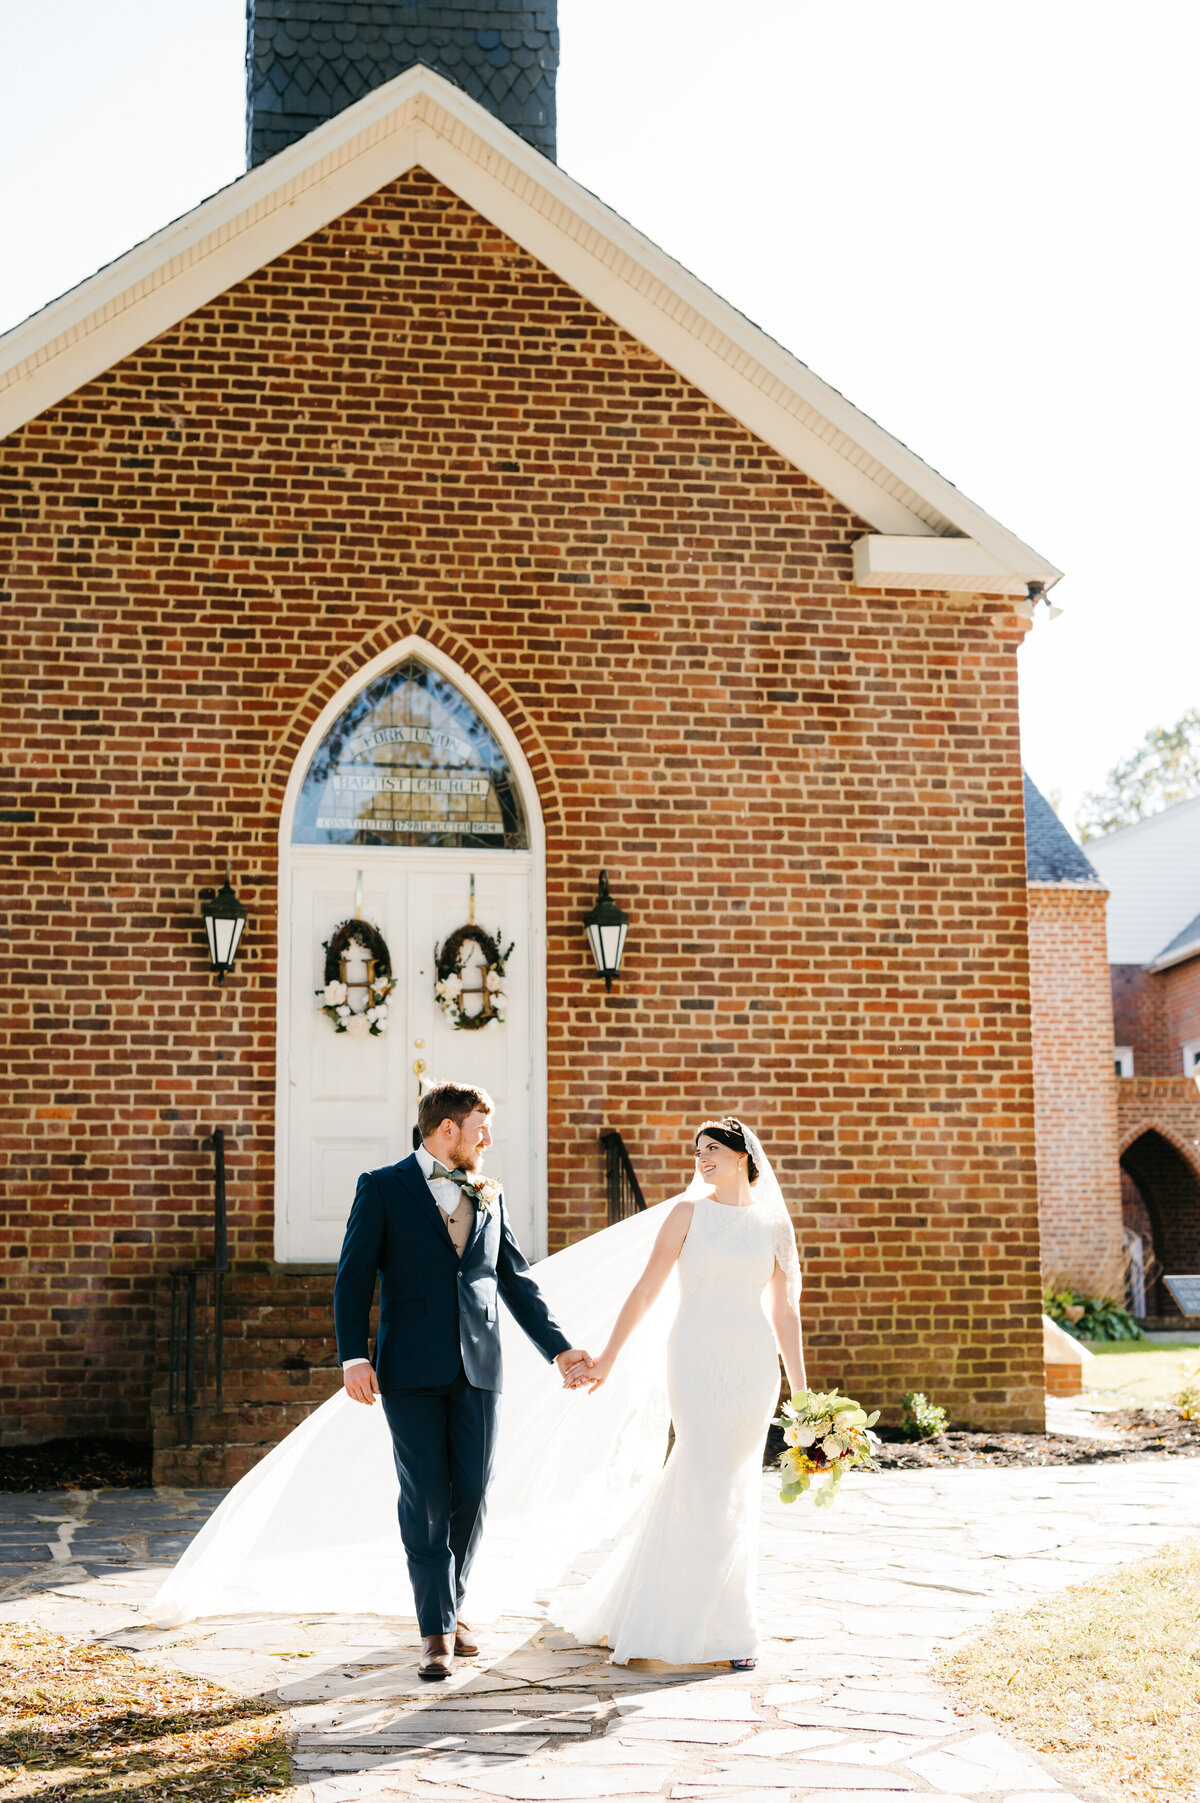 Richmond Wedding venues with brick chapel and stone paths featuring bride and groom walking together while holding hands at sunset with the brides veil illuminating as the sun shines through it while it blows in the wind